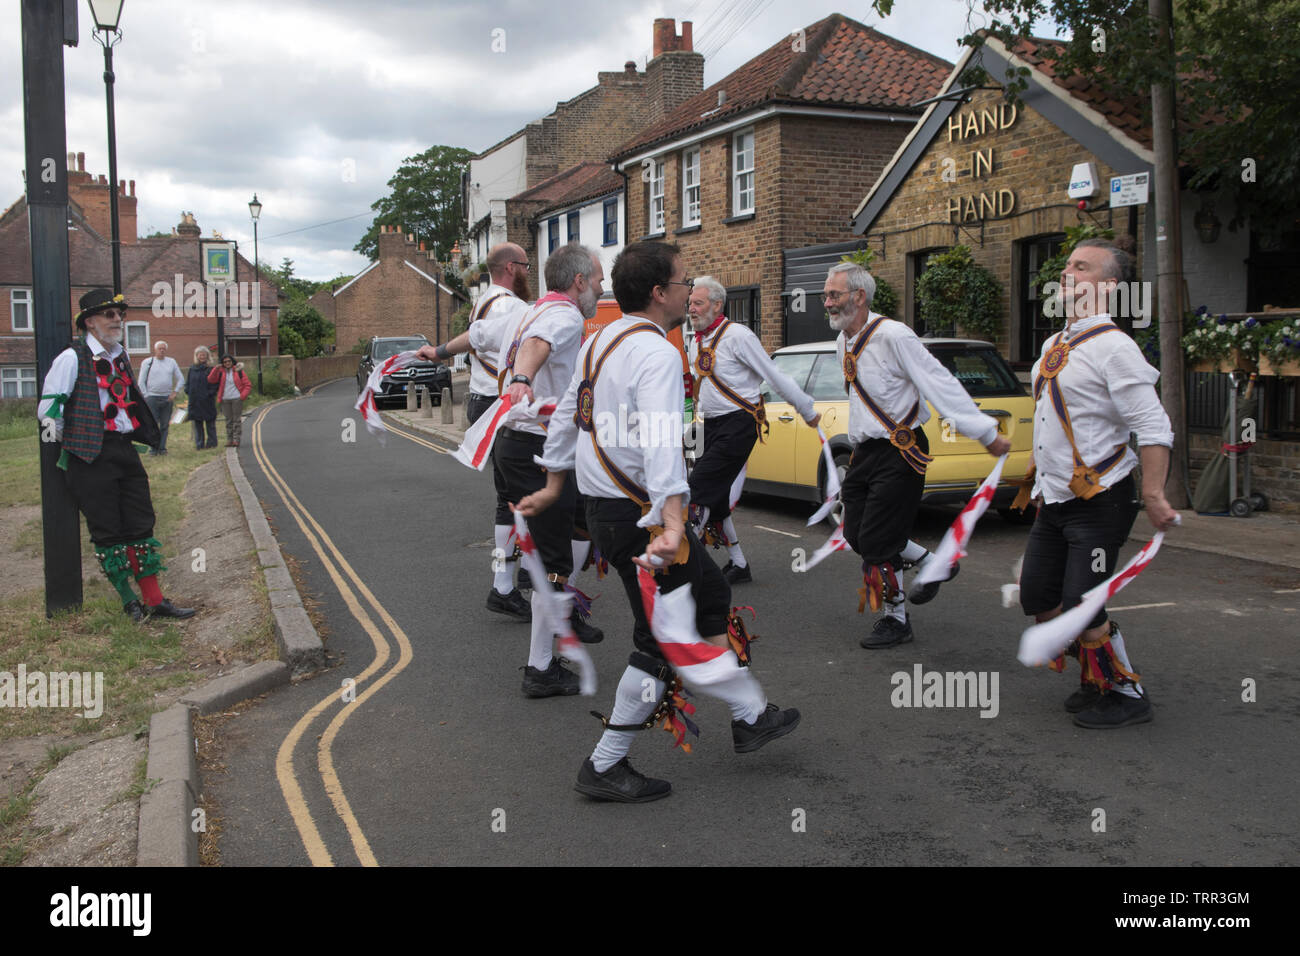 Wimbledon Common south west London Hand in Hand pub Morris Dancers dancing outside. 2010s UK HOMER SYKES Stock Photo